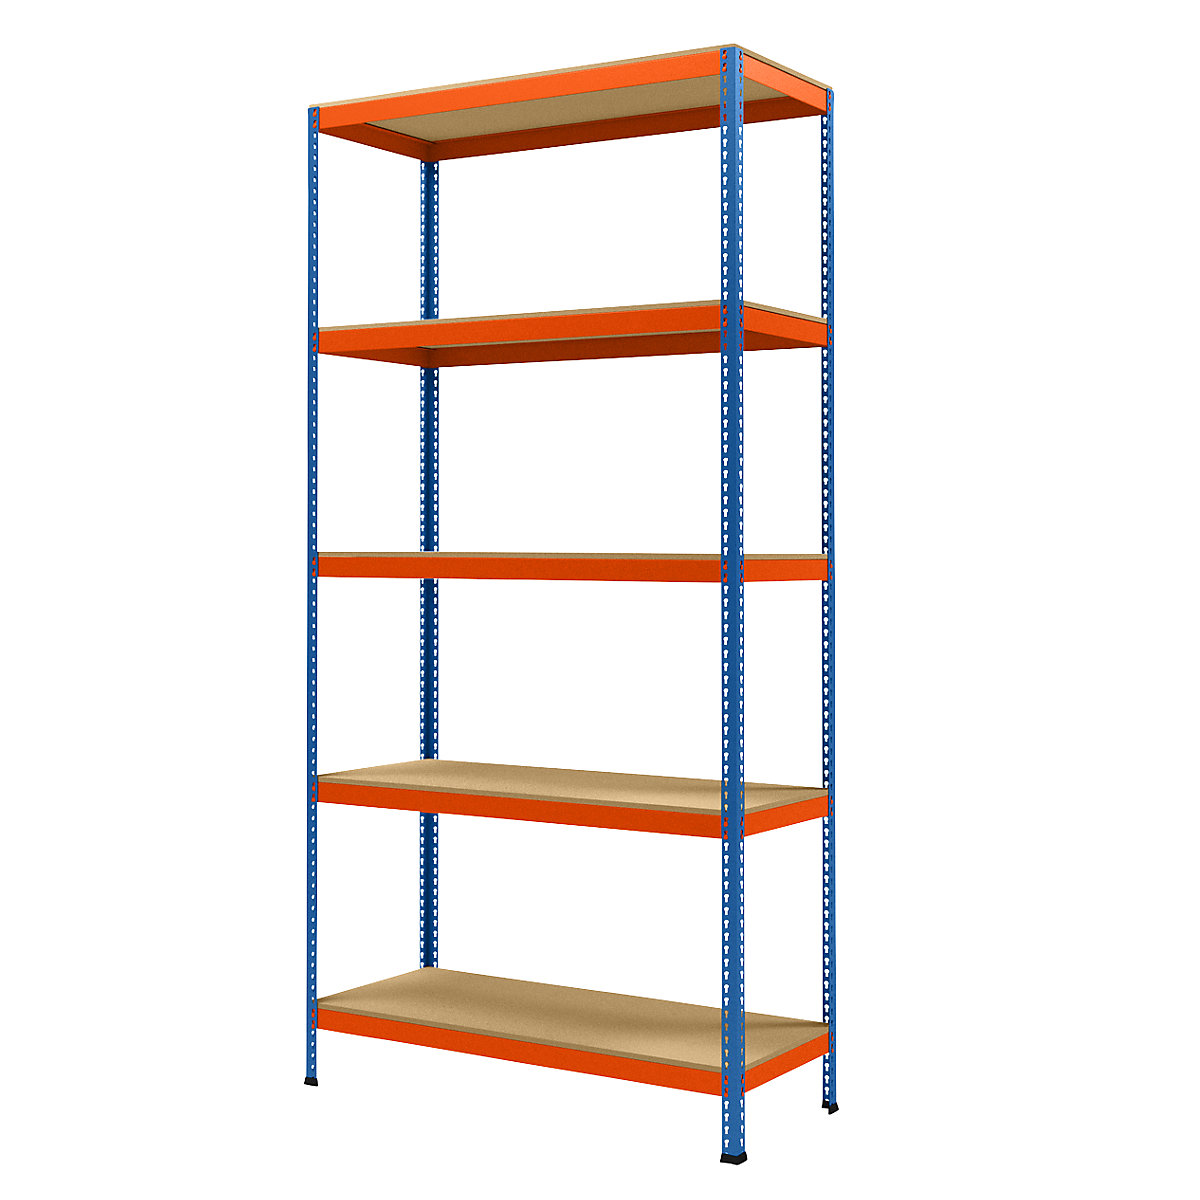 Wide span heavy duty shelving, height 3048 mm, overall depth 621 mm, width 1536 mm